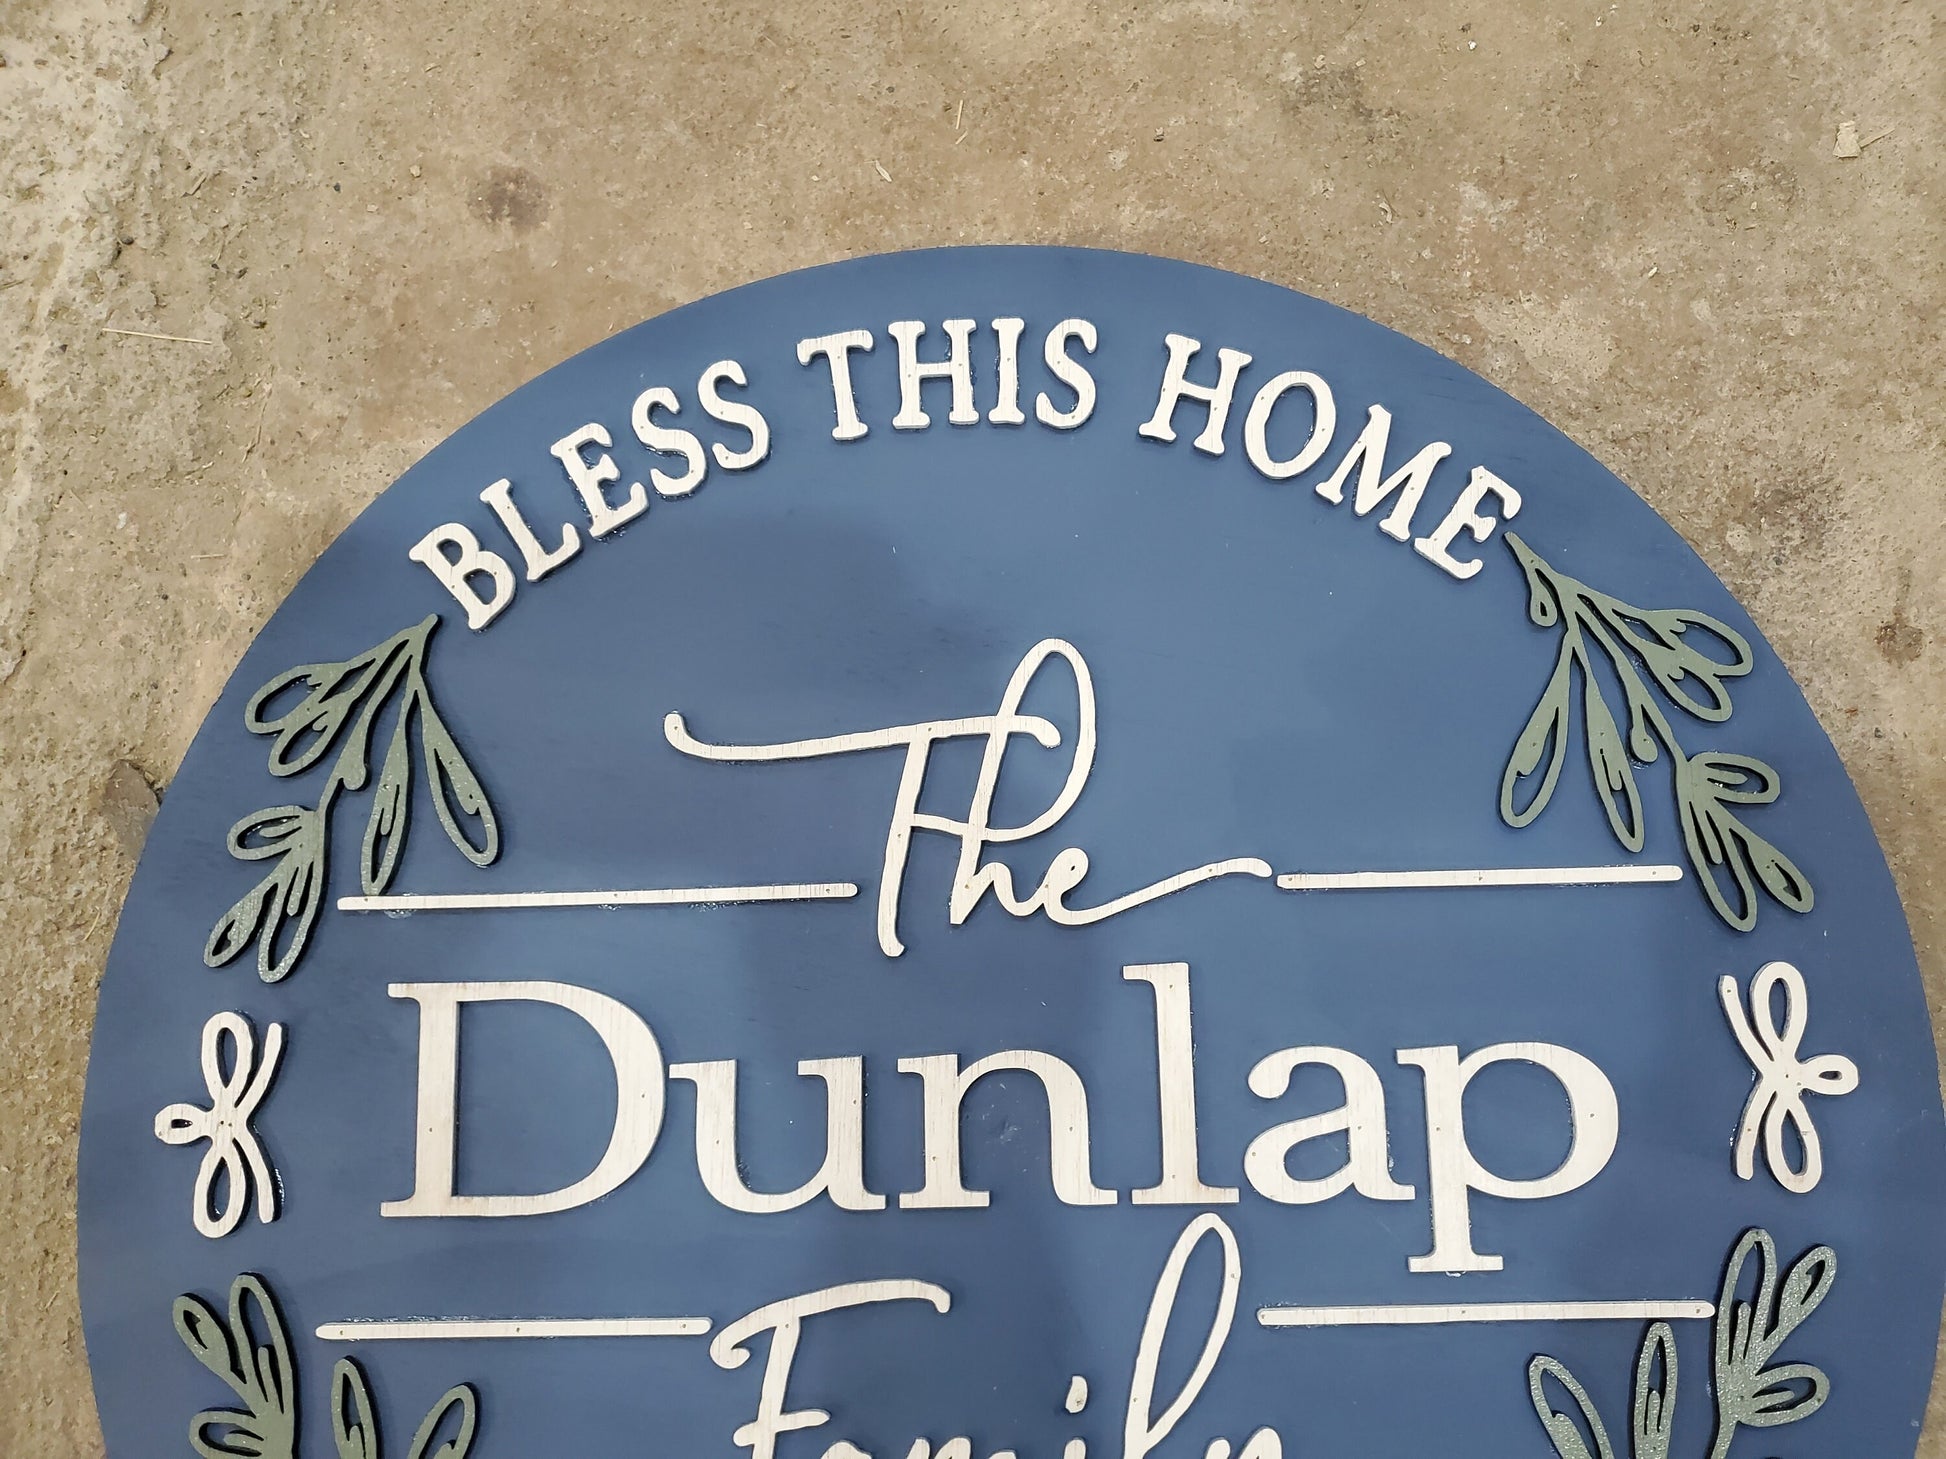 Custom Home Last Name Family Name Sign Bless this Home Door House Warming Established Circle Plaque Round Large 3D Raised Image Laser Cut